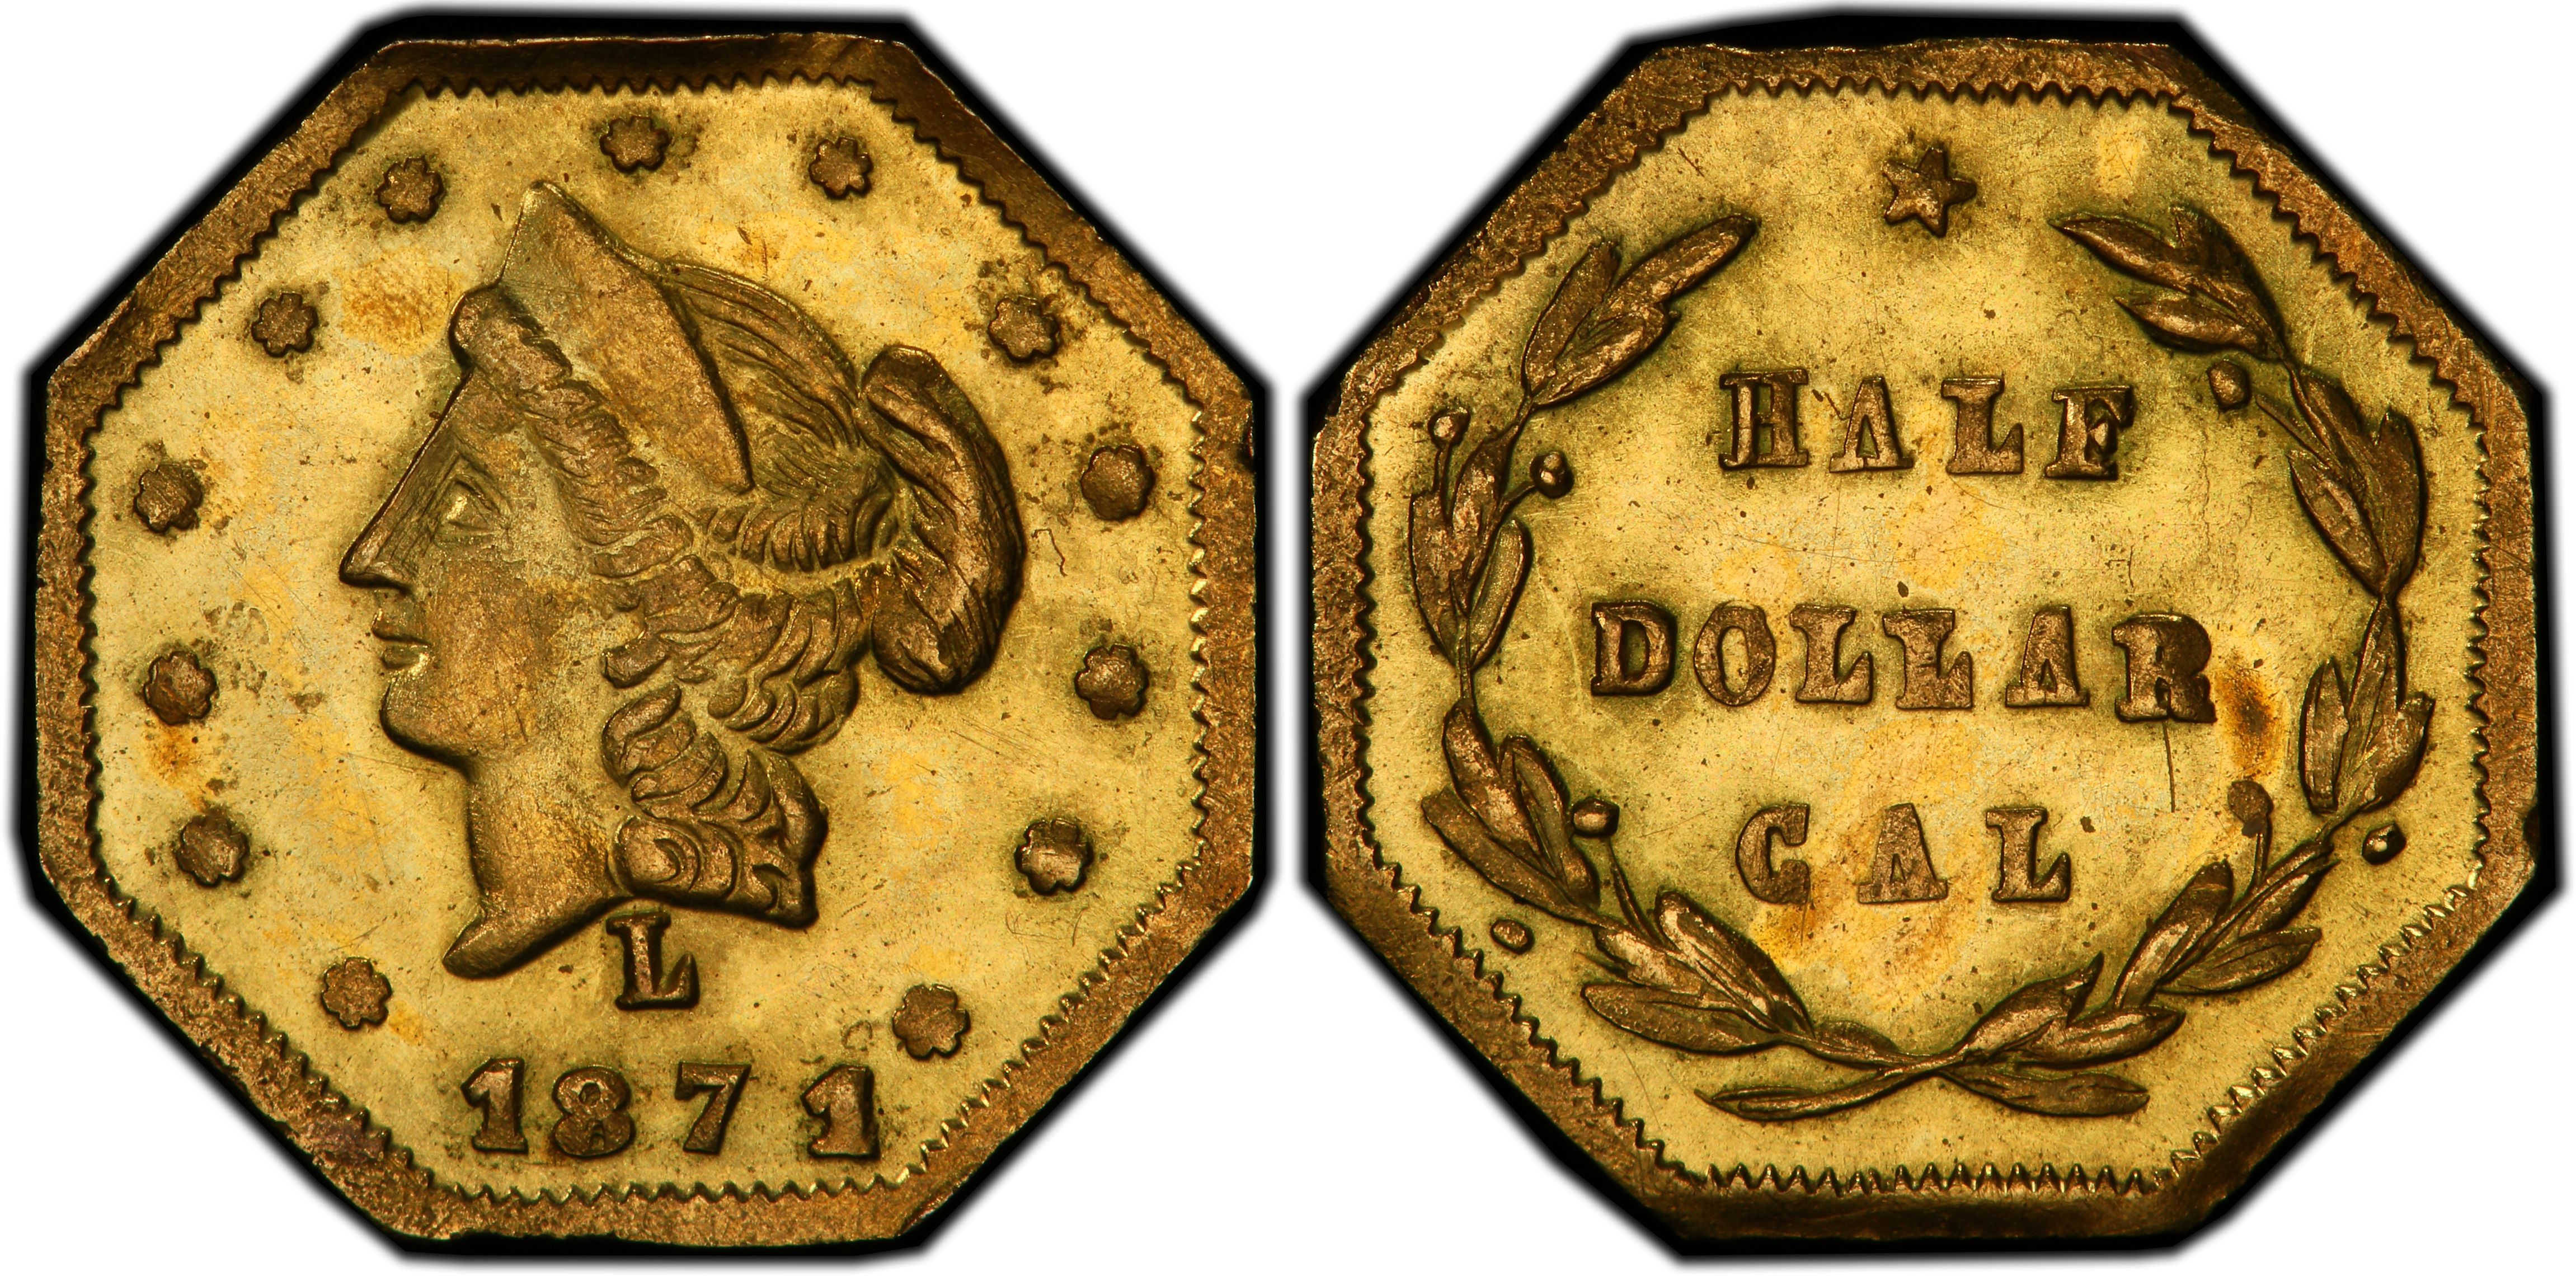 1871 $1 (Regular Strike) Liberty Seated Dollar - PCGS CoinFacts